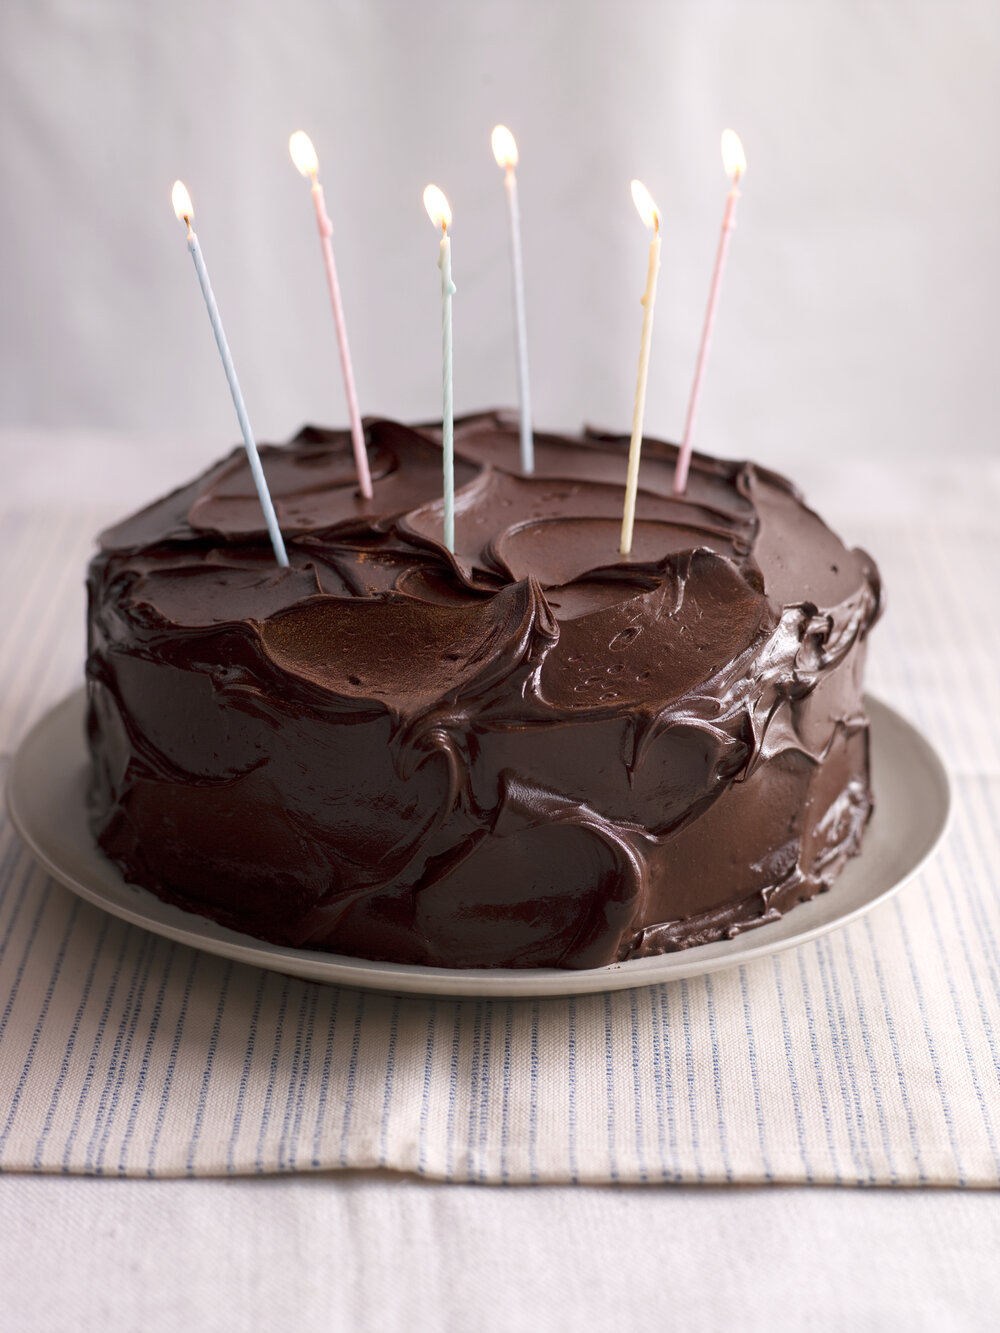 Cake with chocolate frosting and candles 